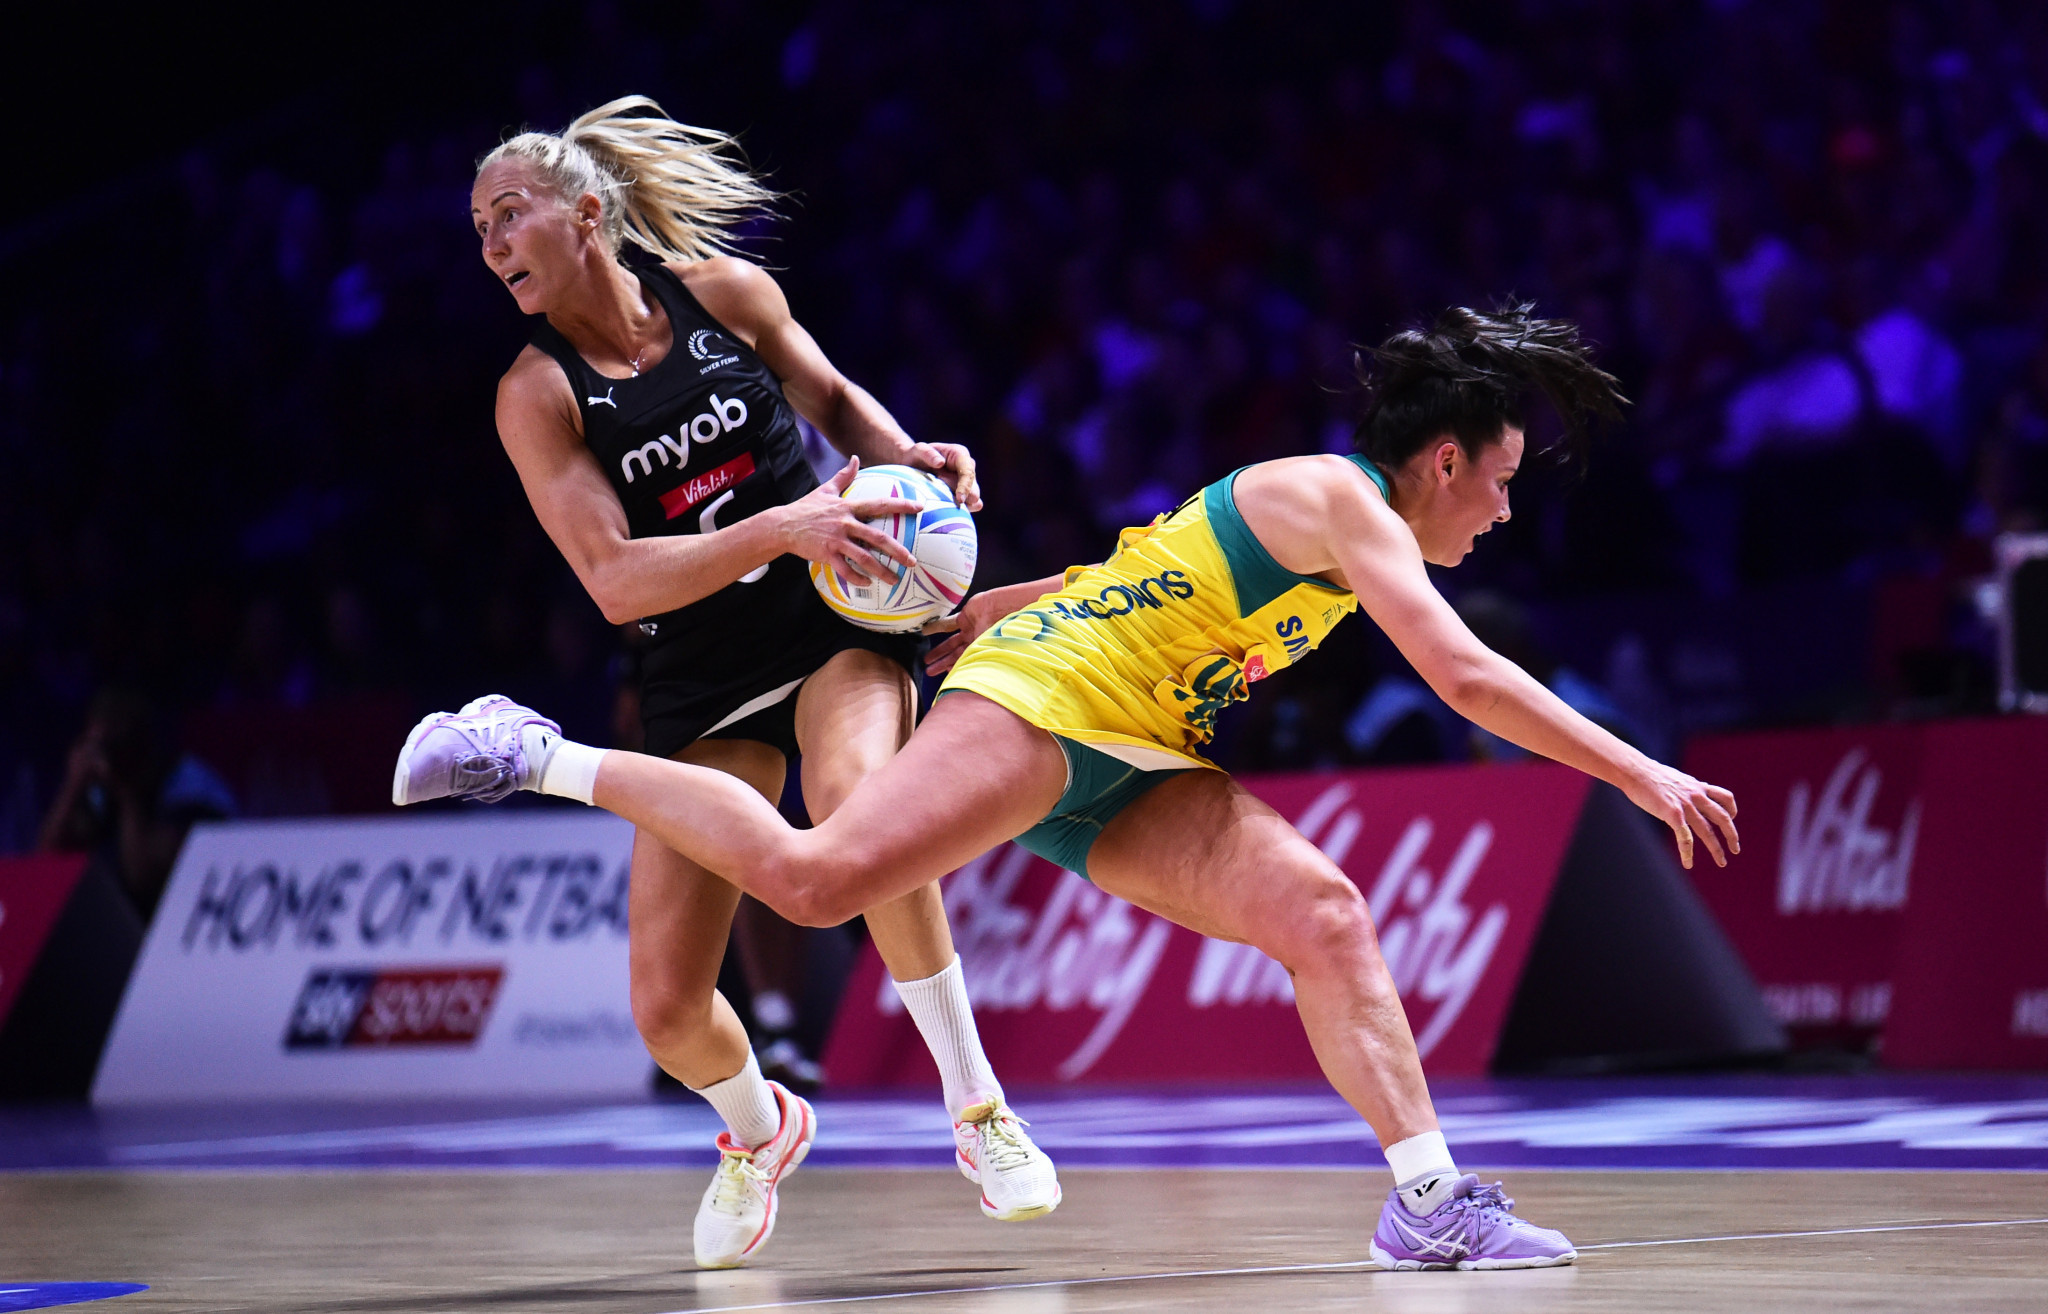 New Zealand took control of the match in the second quarter as they ended Australia's pursuit of a 12th title ©Getty Images